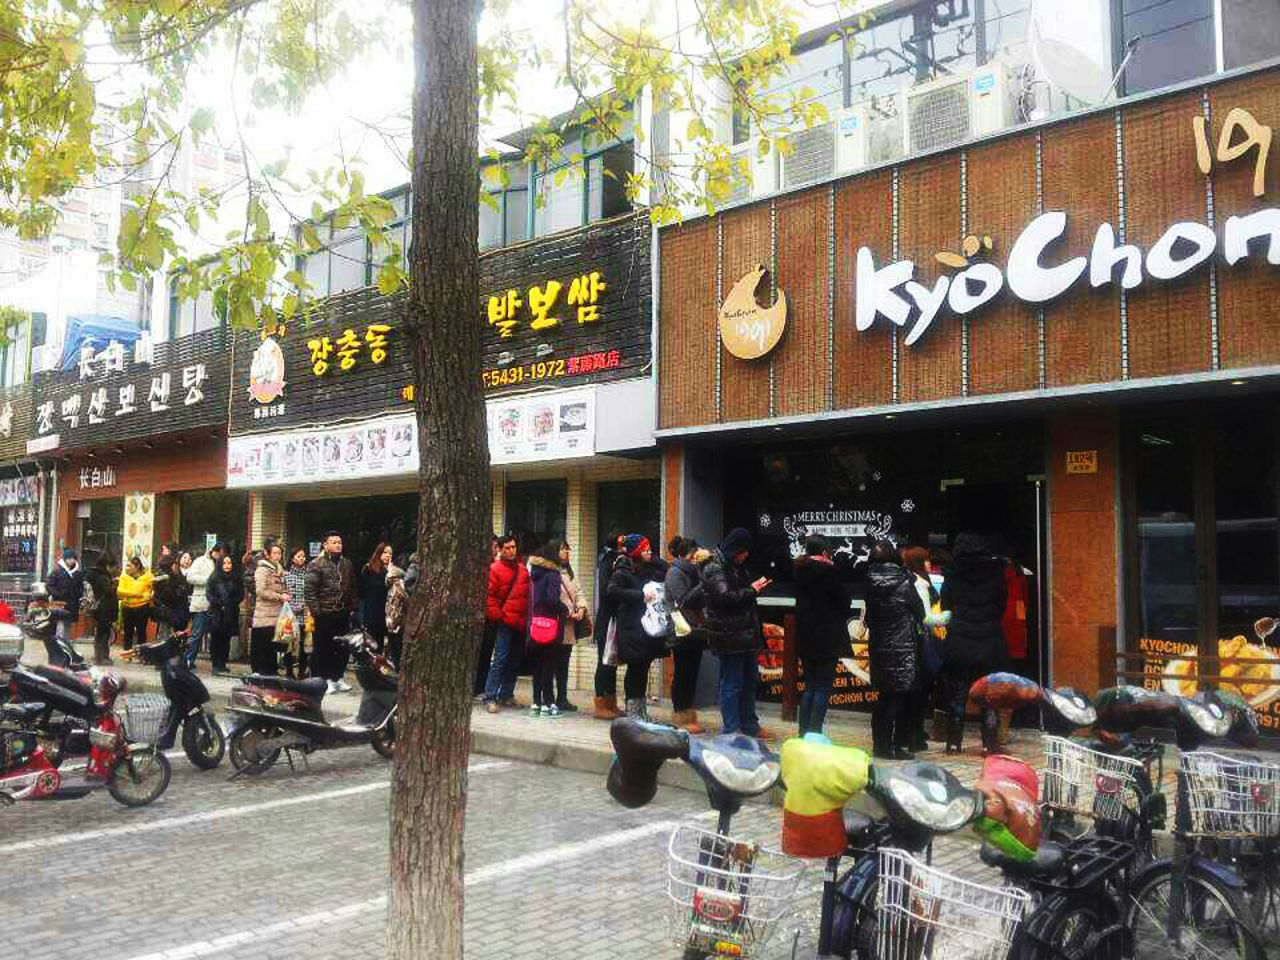 Kyochon created a stir in the domestic delivery chicken scene in 1991 with its trademark soy sauce chicken. 